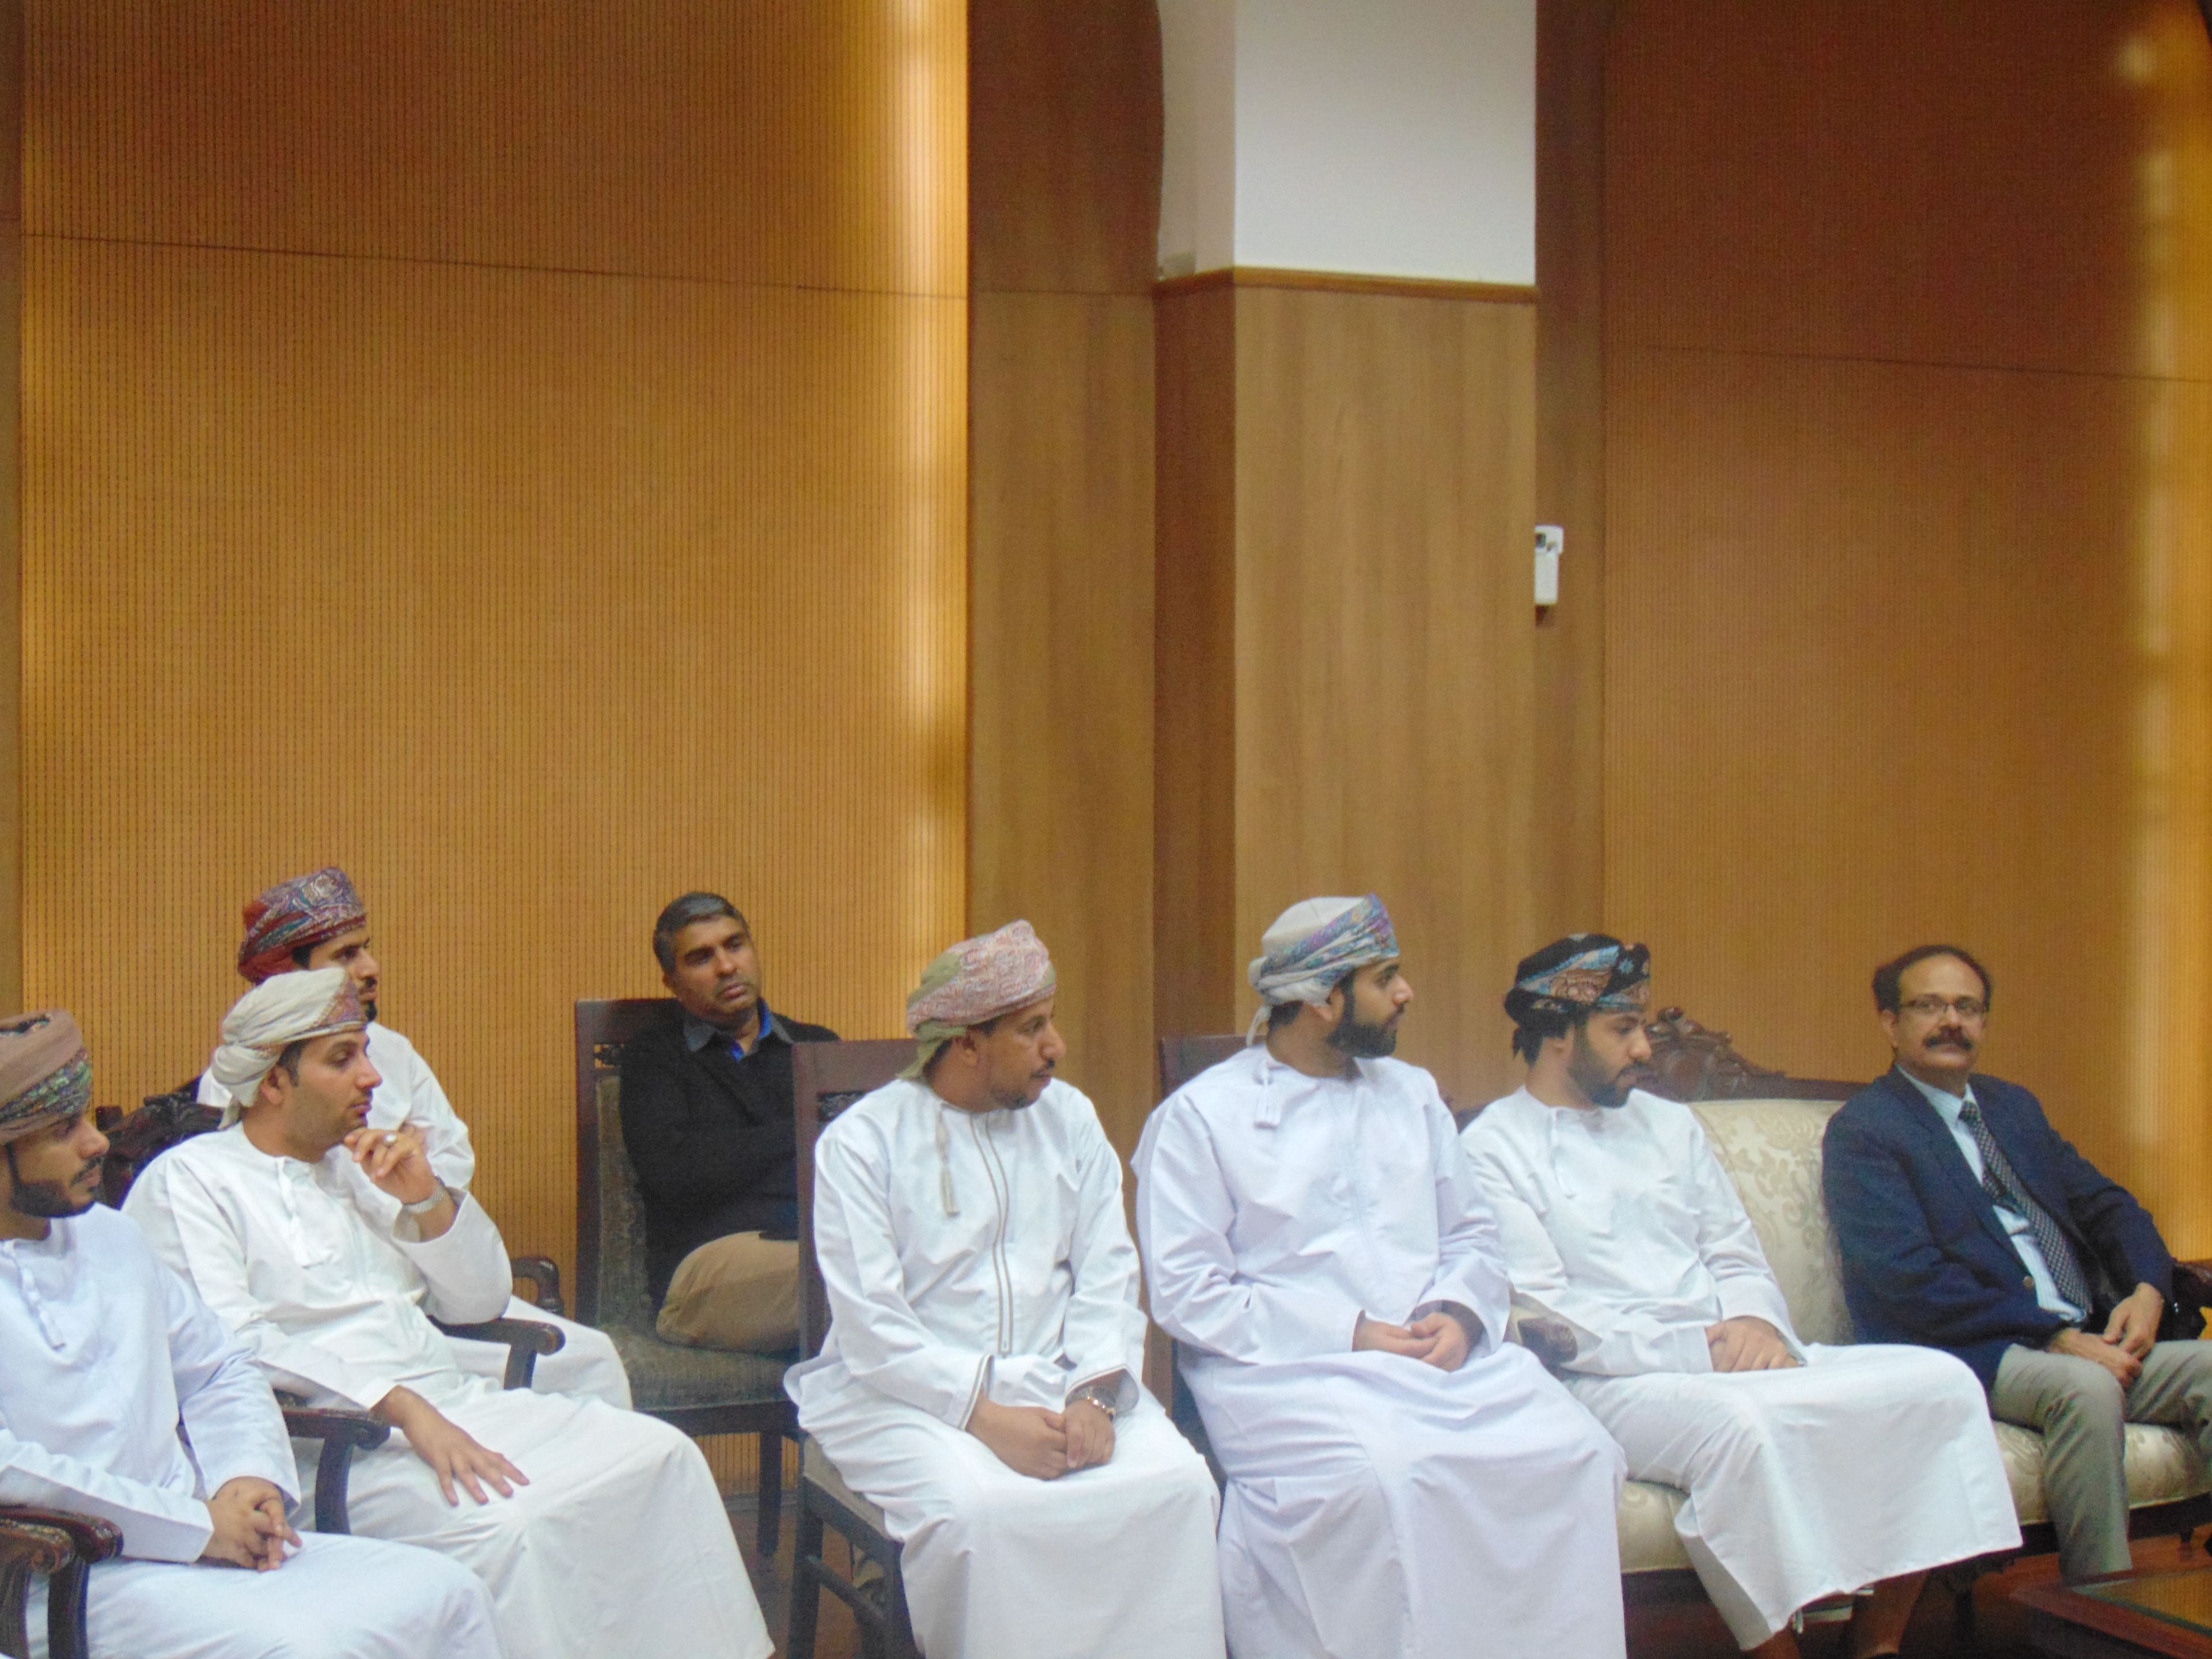 Foreign Delegation from Oman Visited Election Museum on 28.02.2019